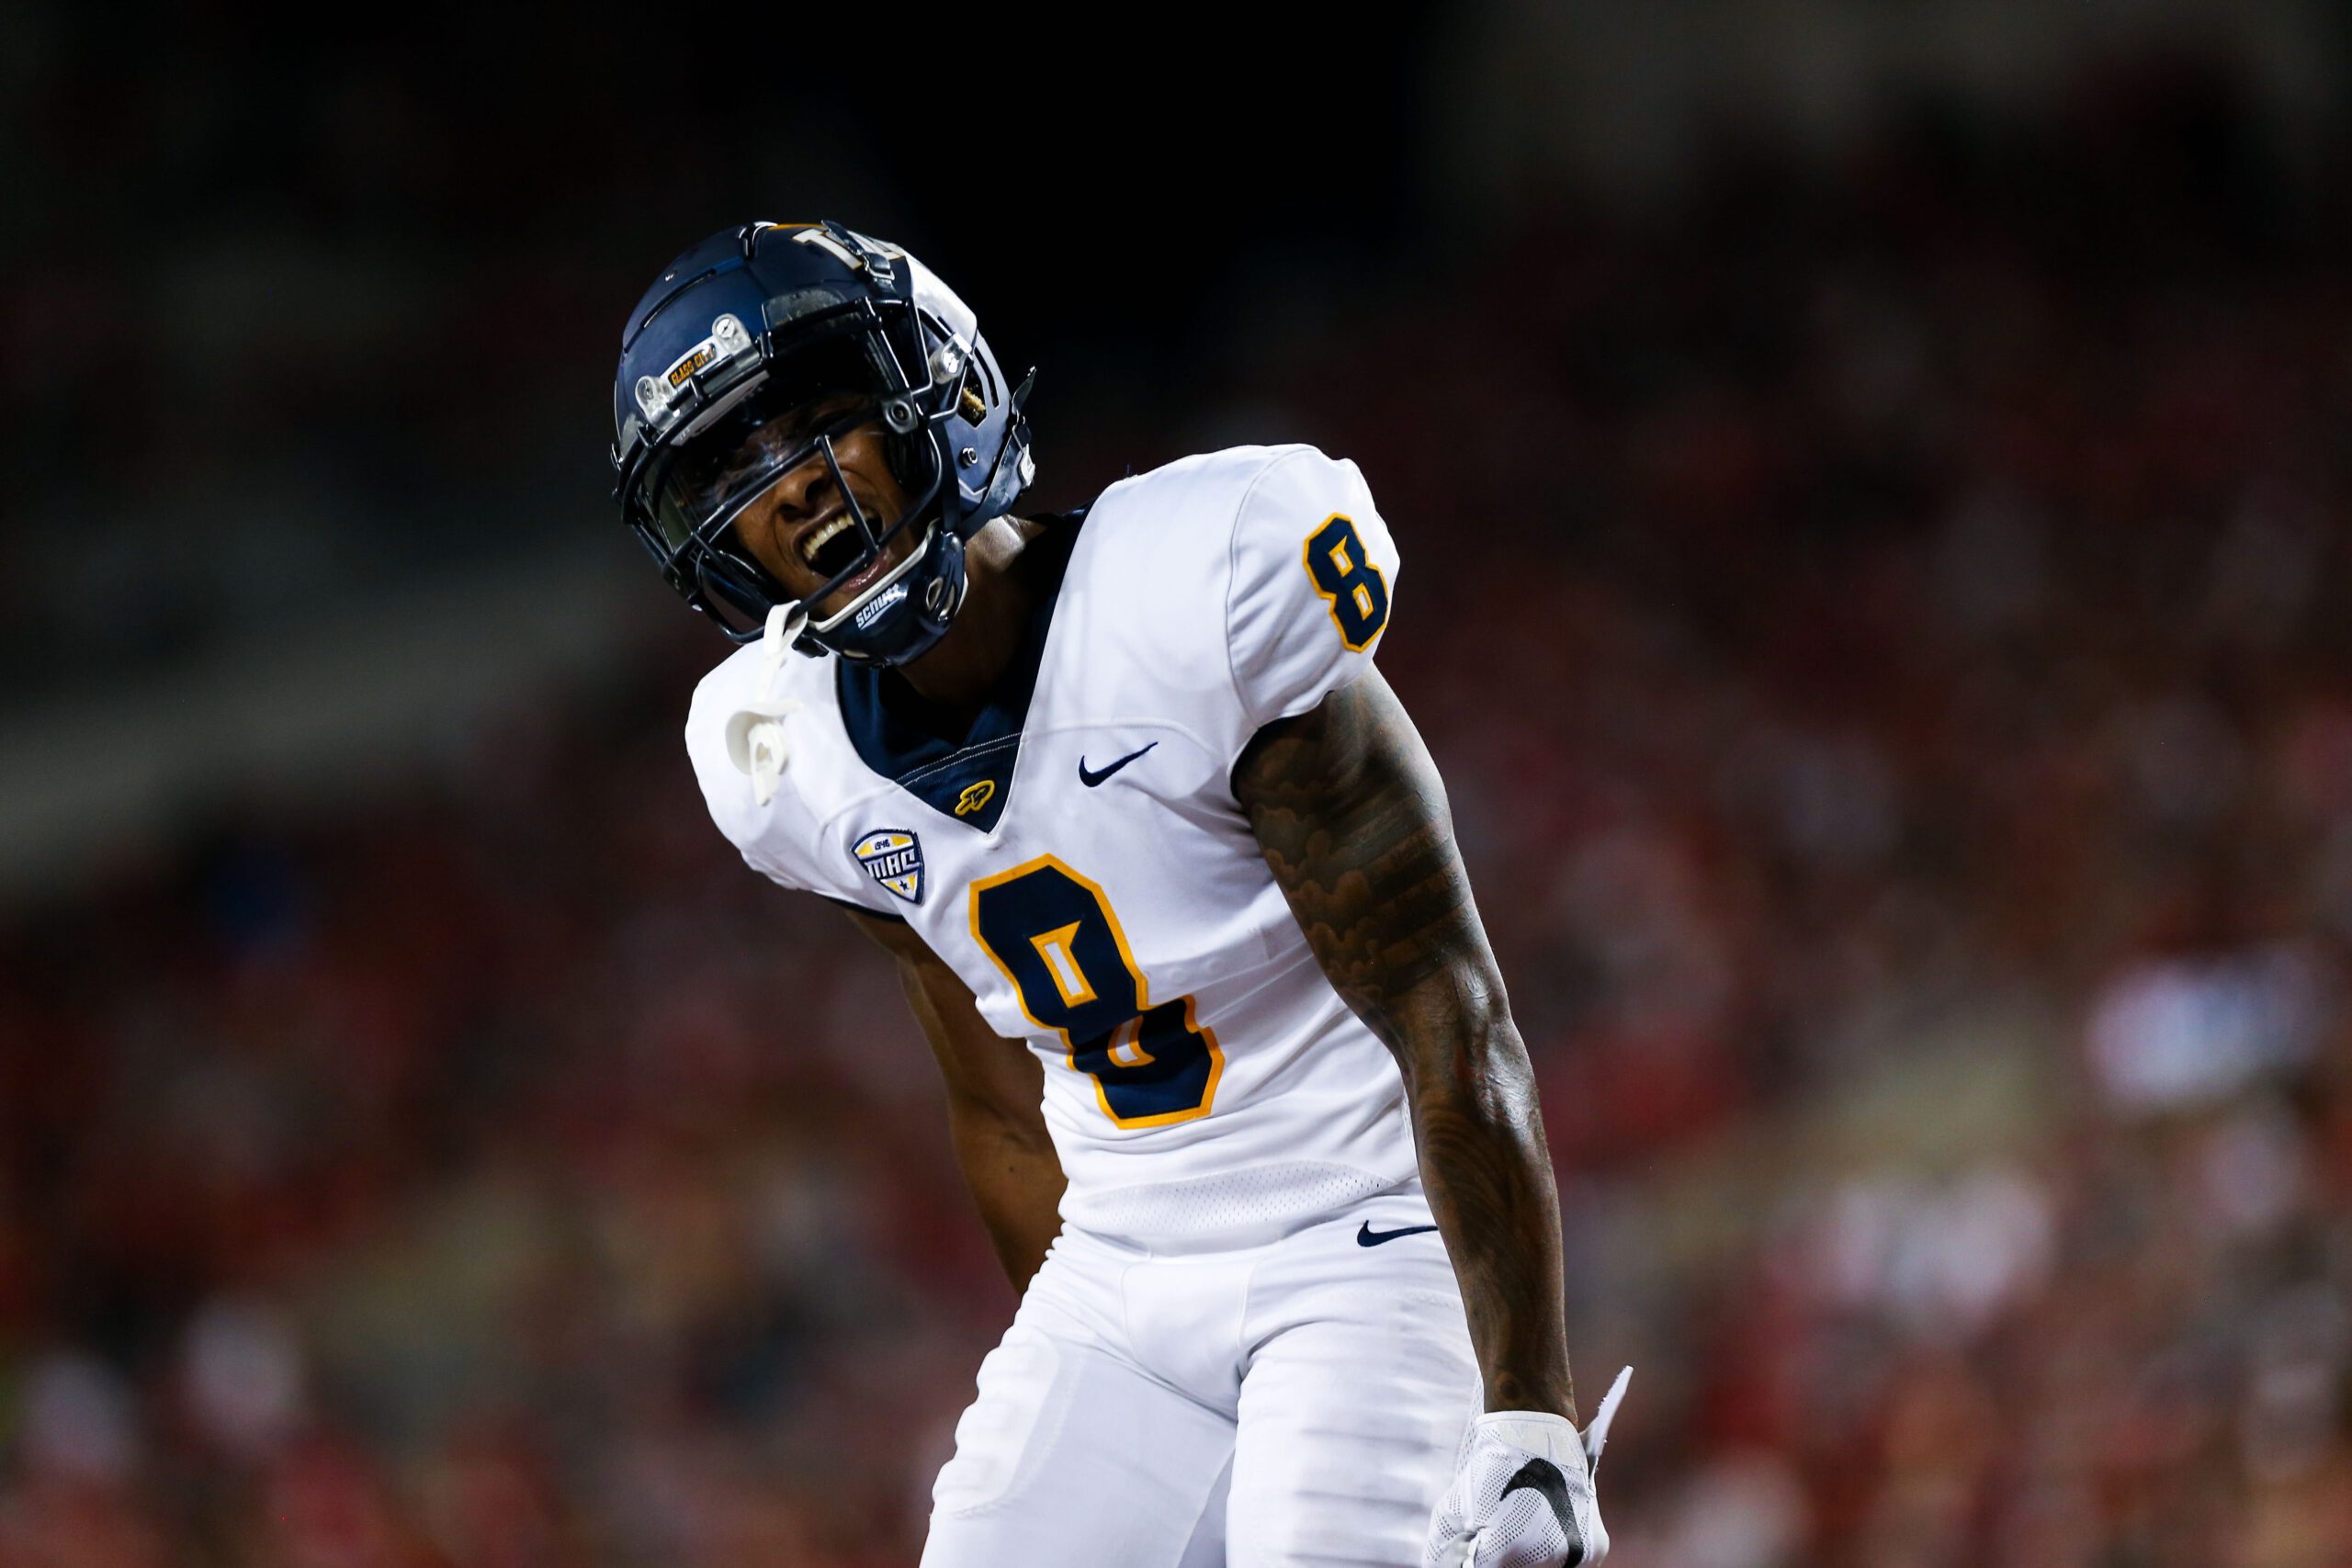 Devin Maddox is a shifty receiver and quality return specialist at Toledo. Hula Bowl scout Justyce Gordon breaks down Maddox as an NFL Prospect in his report.